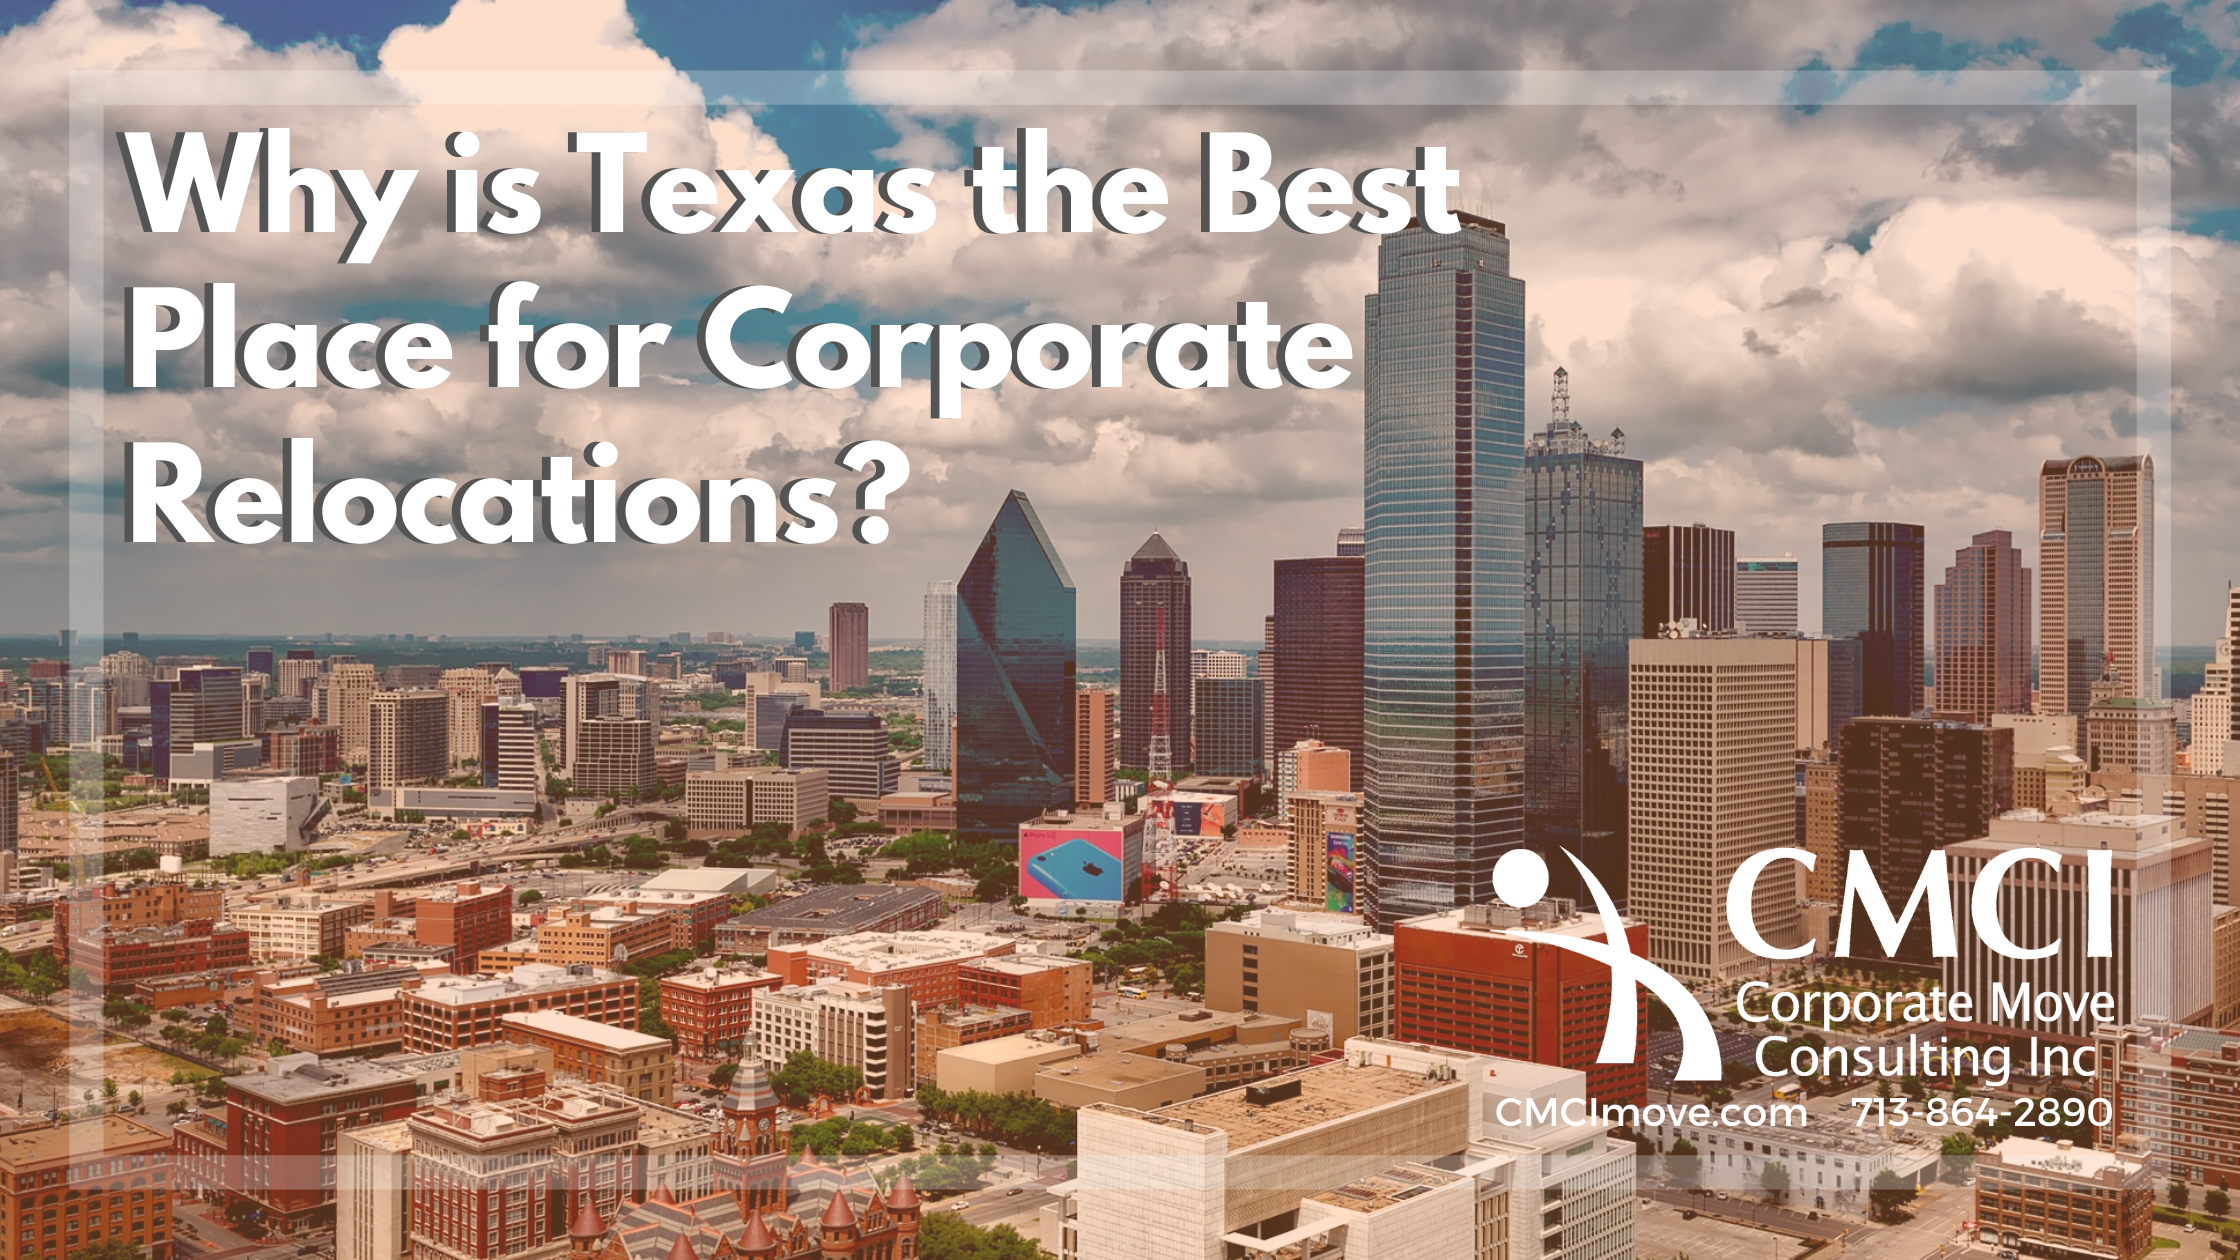 is Texas the Best Place for Corporate Relocations?